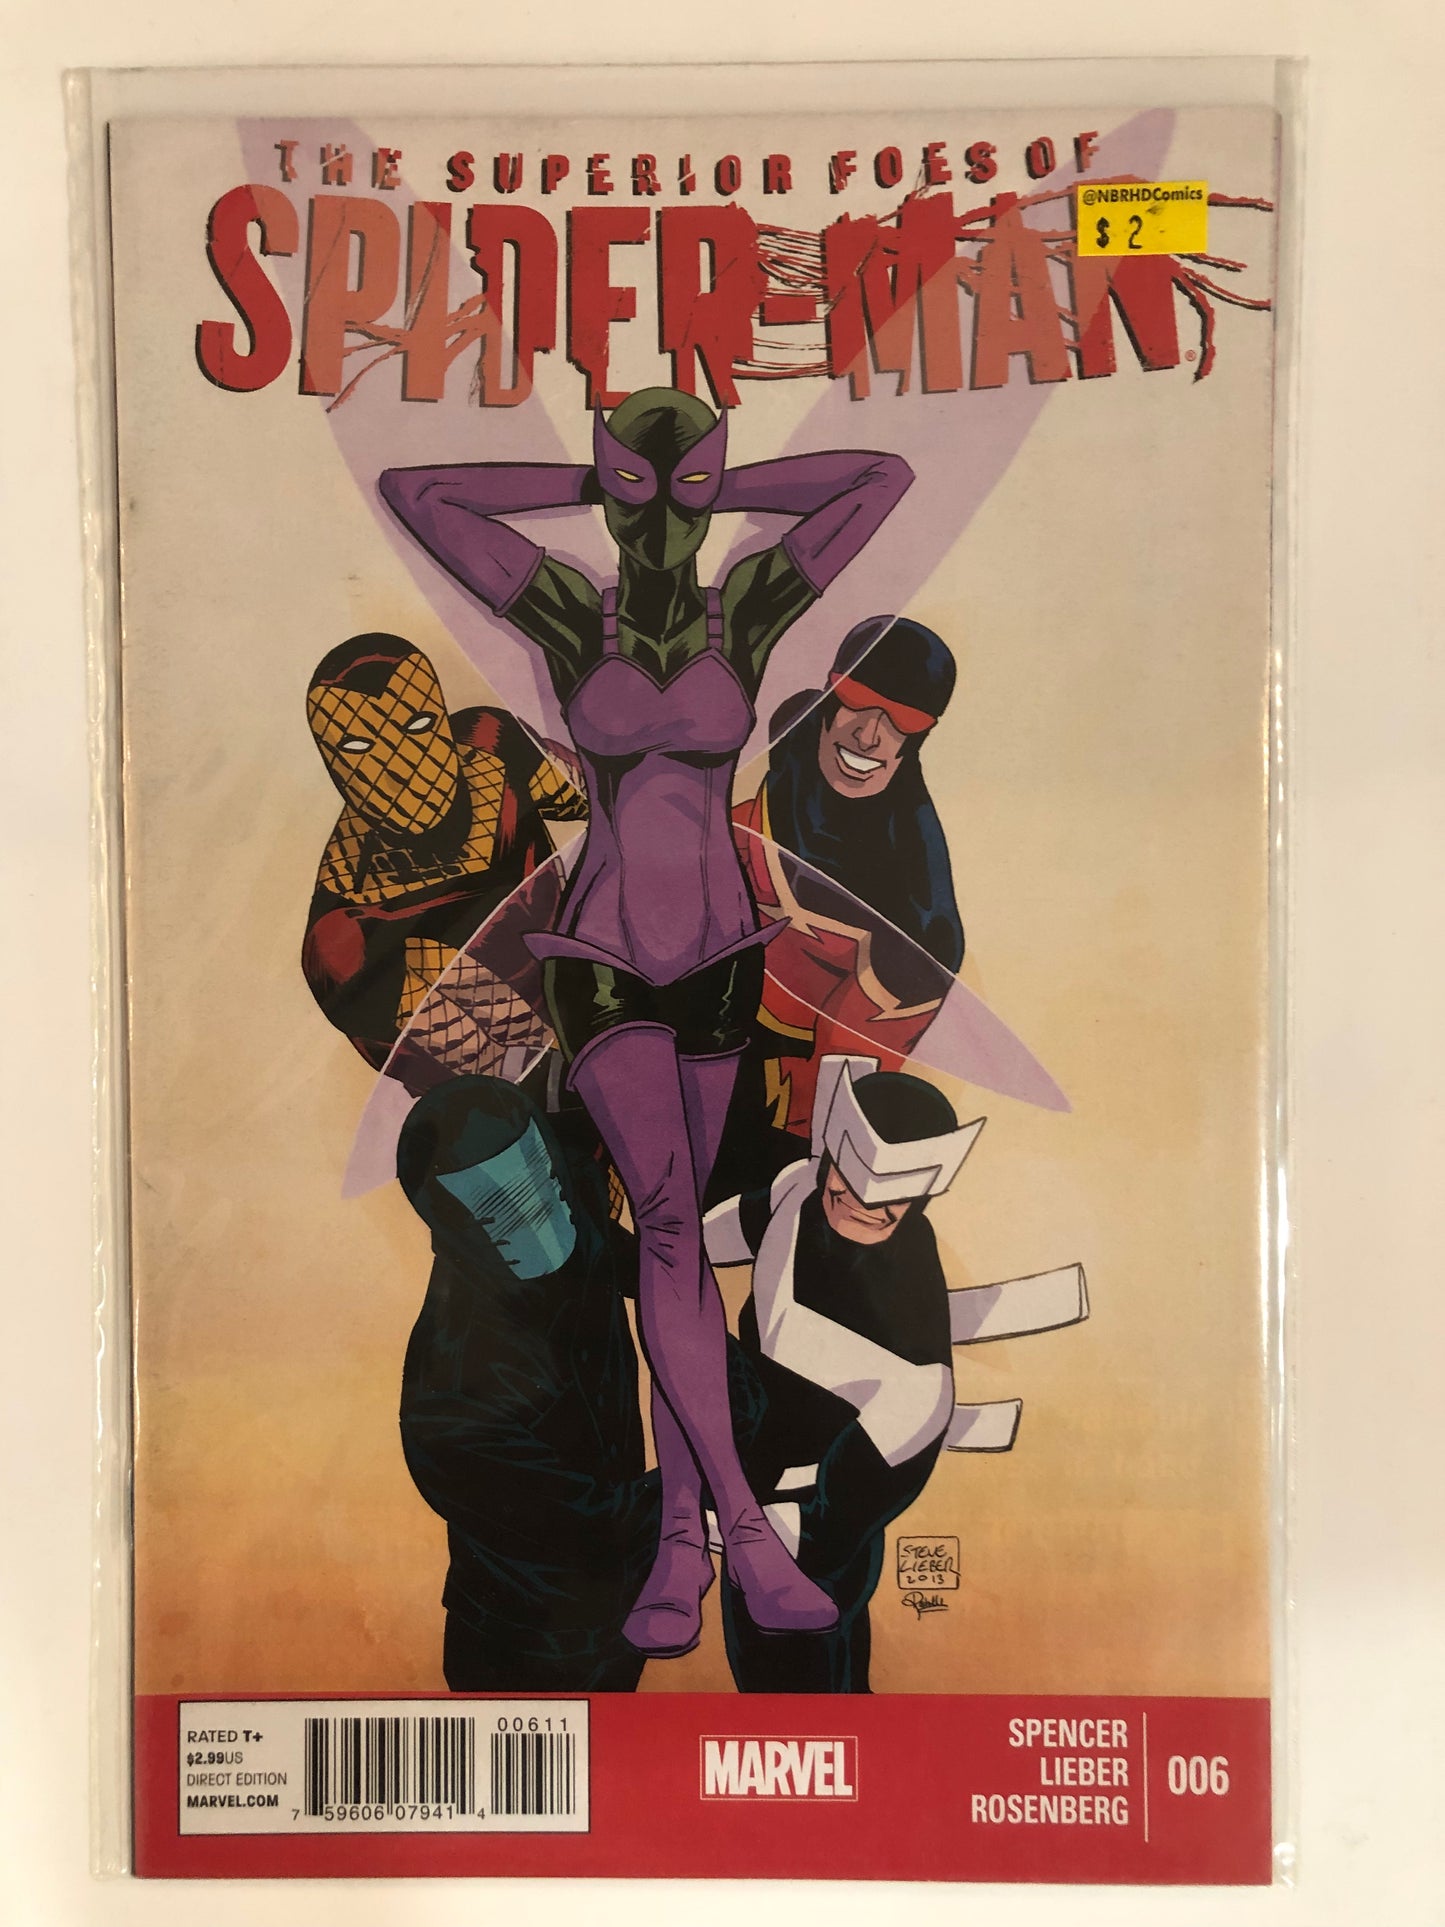 The Superior Foes of Spider-Man #6